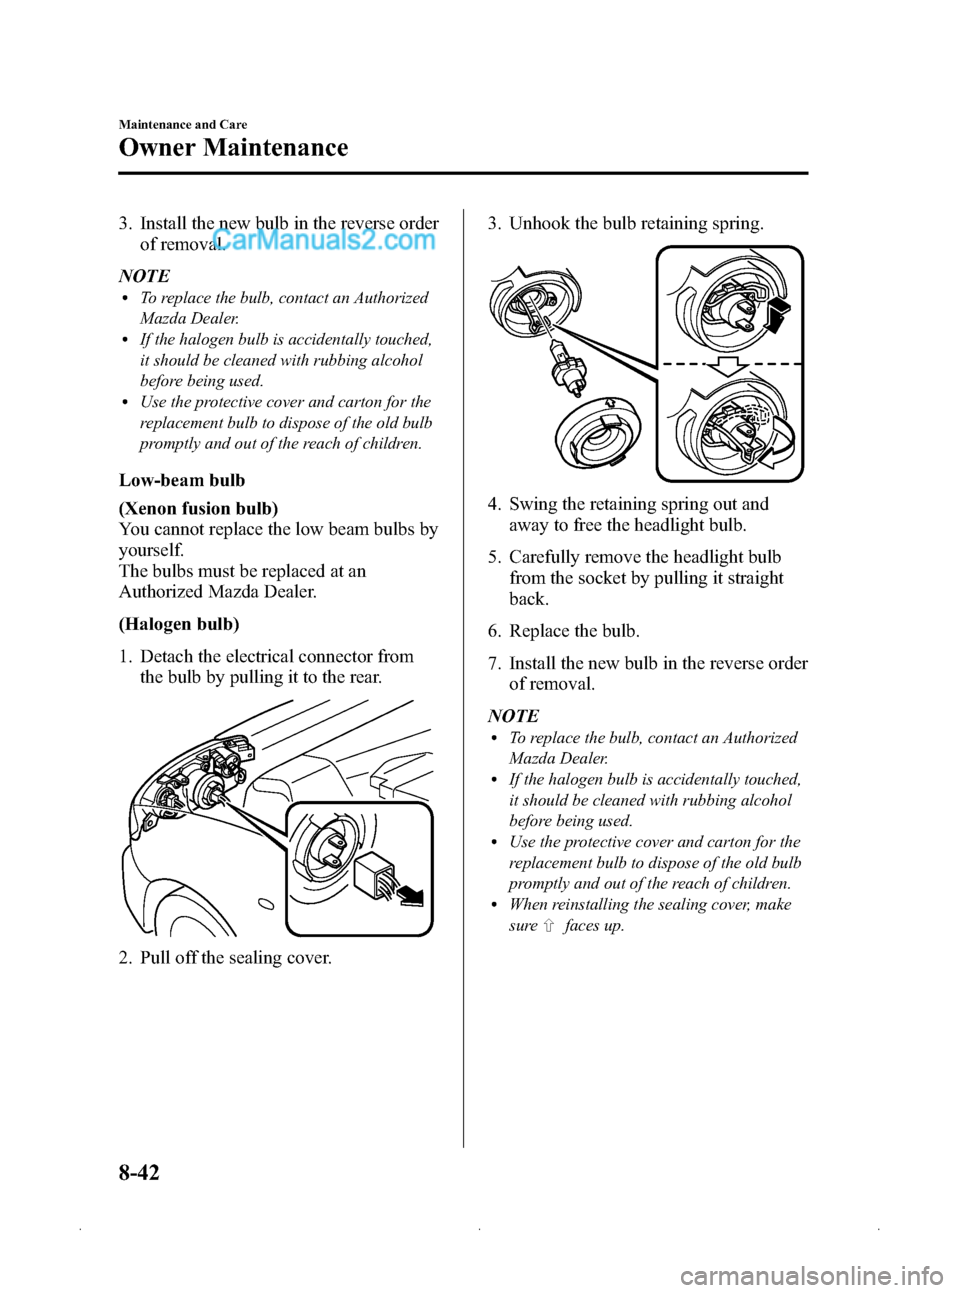 MAZDA MODEL MAZDASPEED 3 2009  Owners Manual (in English) Black plate (328,1)
3. Install the new bulb in the reverse orderof removal.
NOTE
lTo replace the bulb, contact an Authorized
Mazda Dealer.
lIf the halogen bulb is accidentally touched,
it should be cl